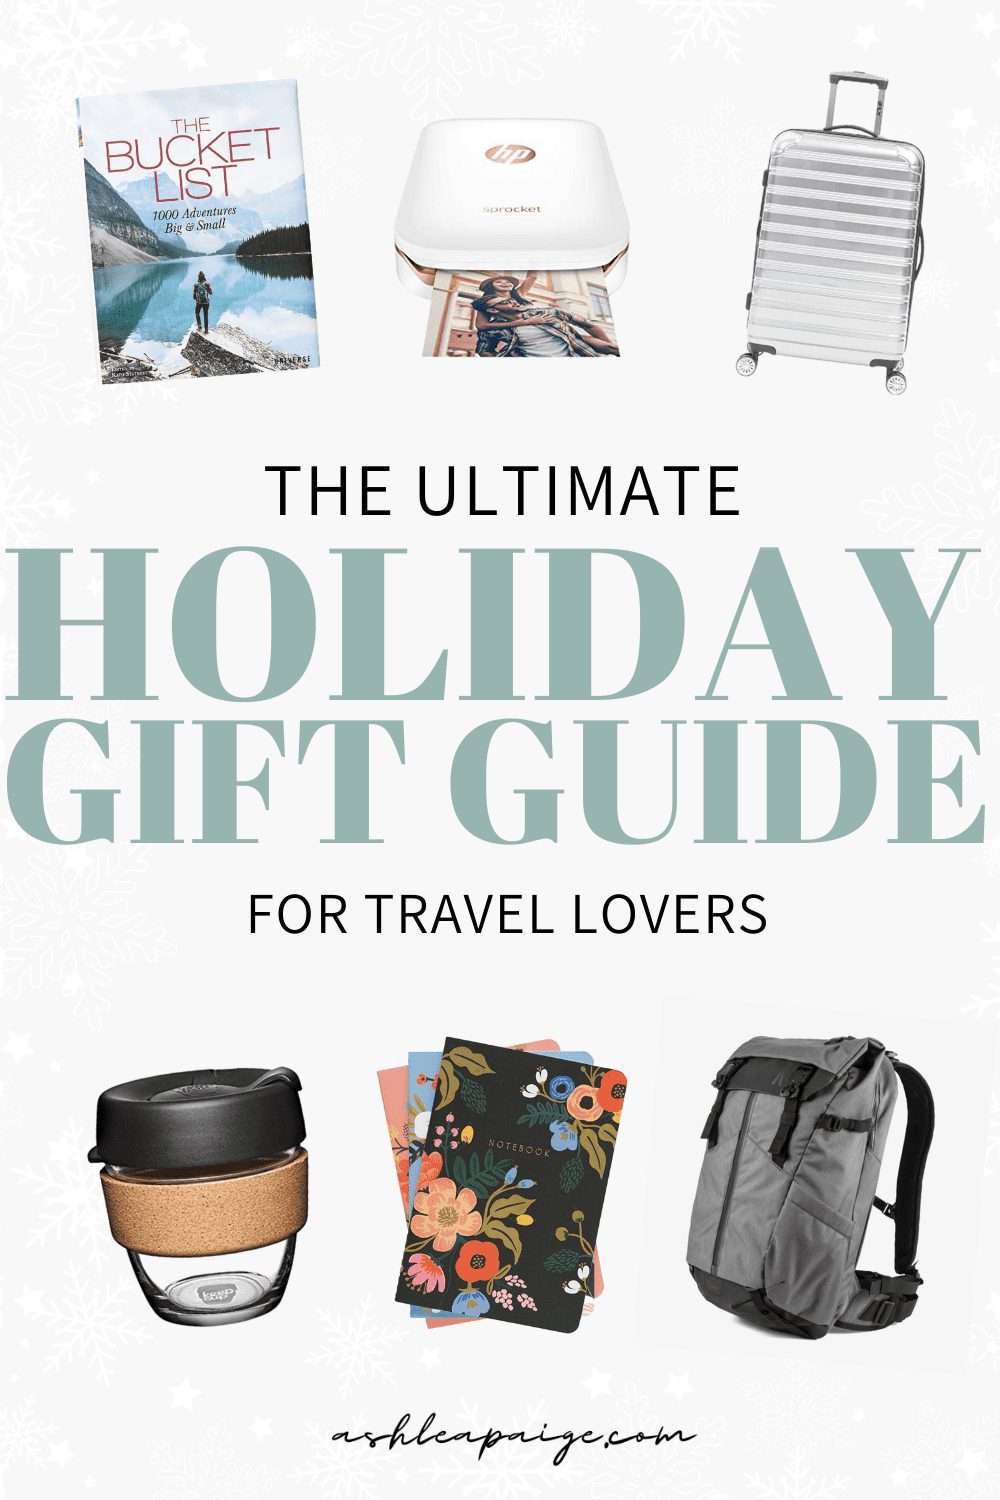 The Ultimate Holiday Gift Guide For Travel Lovers